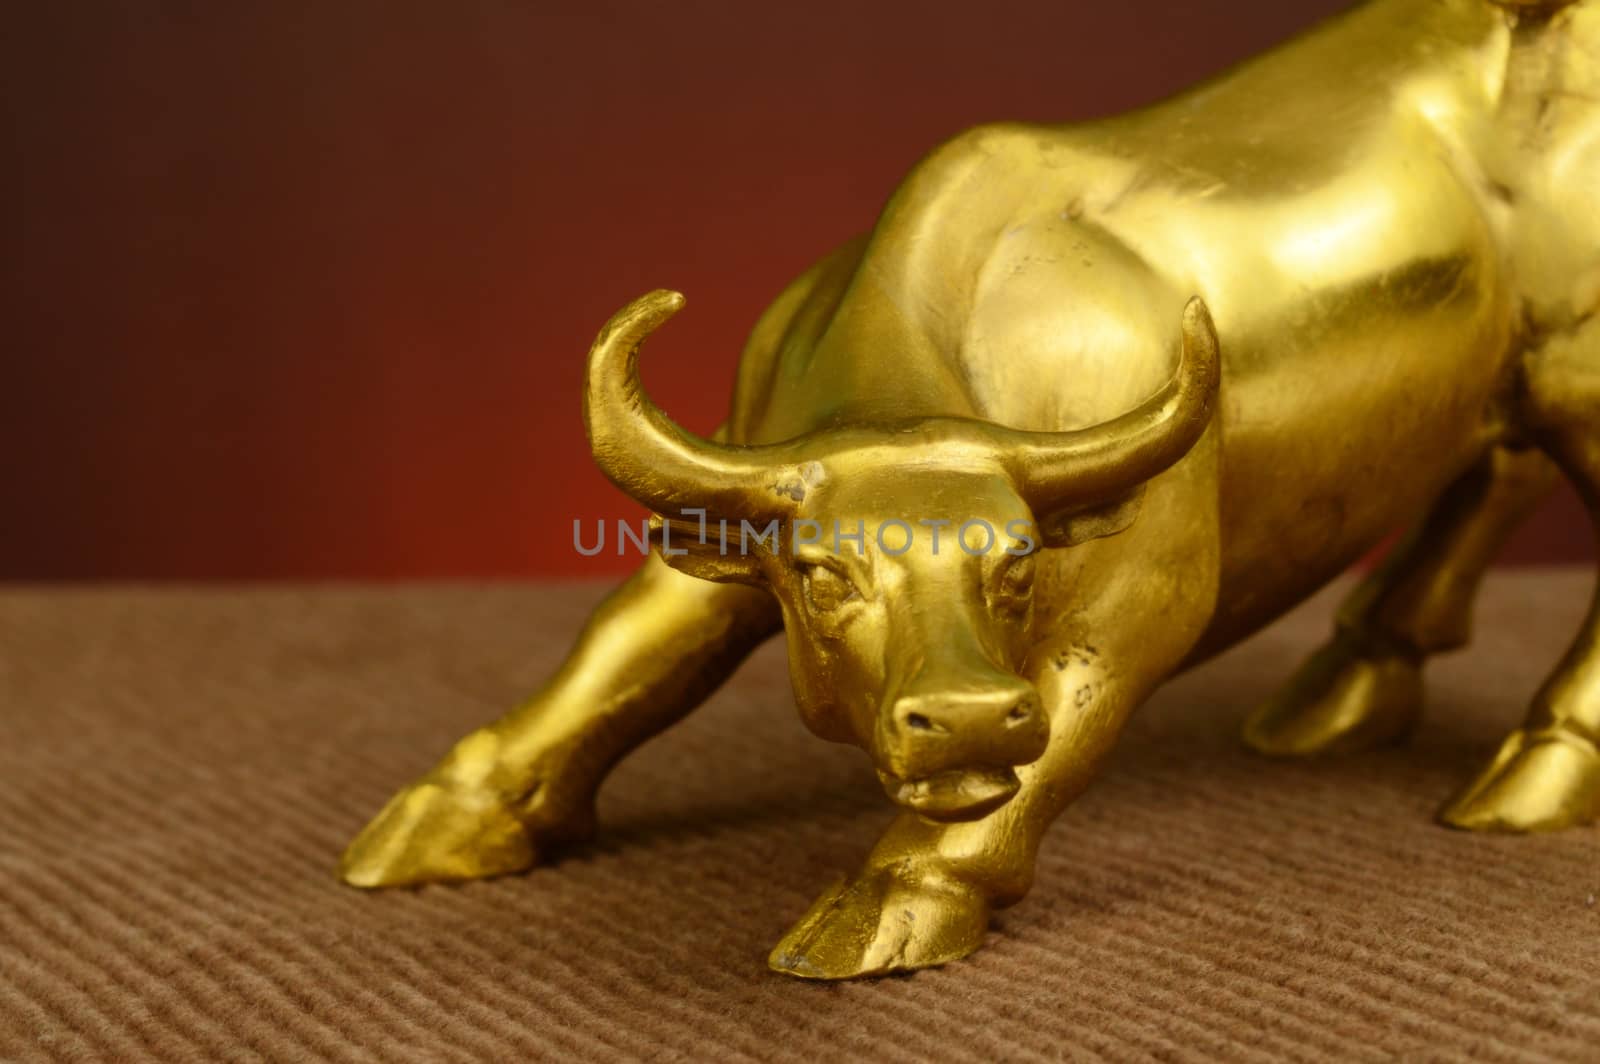 A closeup focus on a brass bull in a striking pose for many powerful concepts.